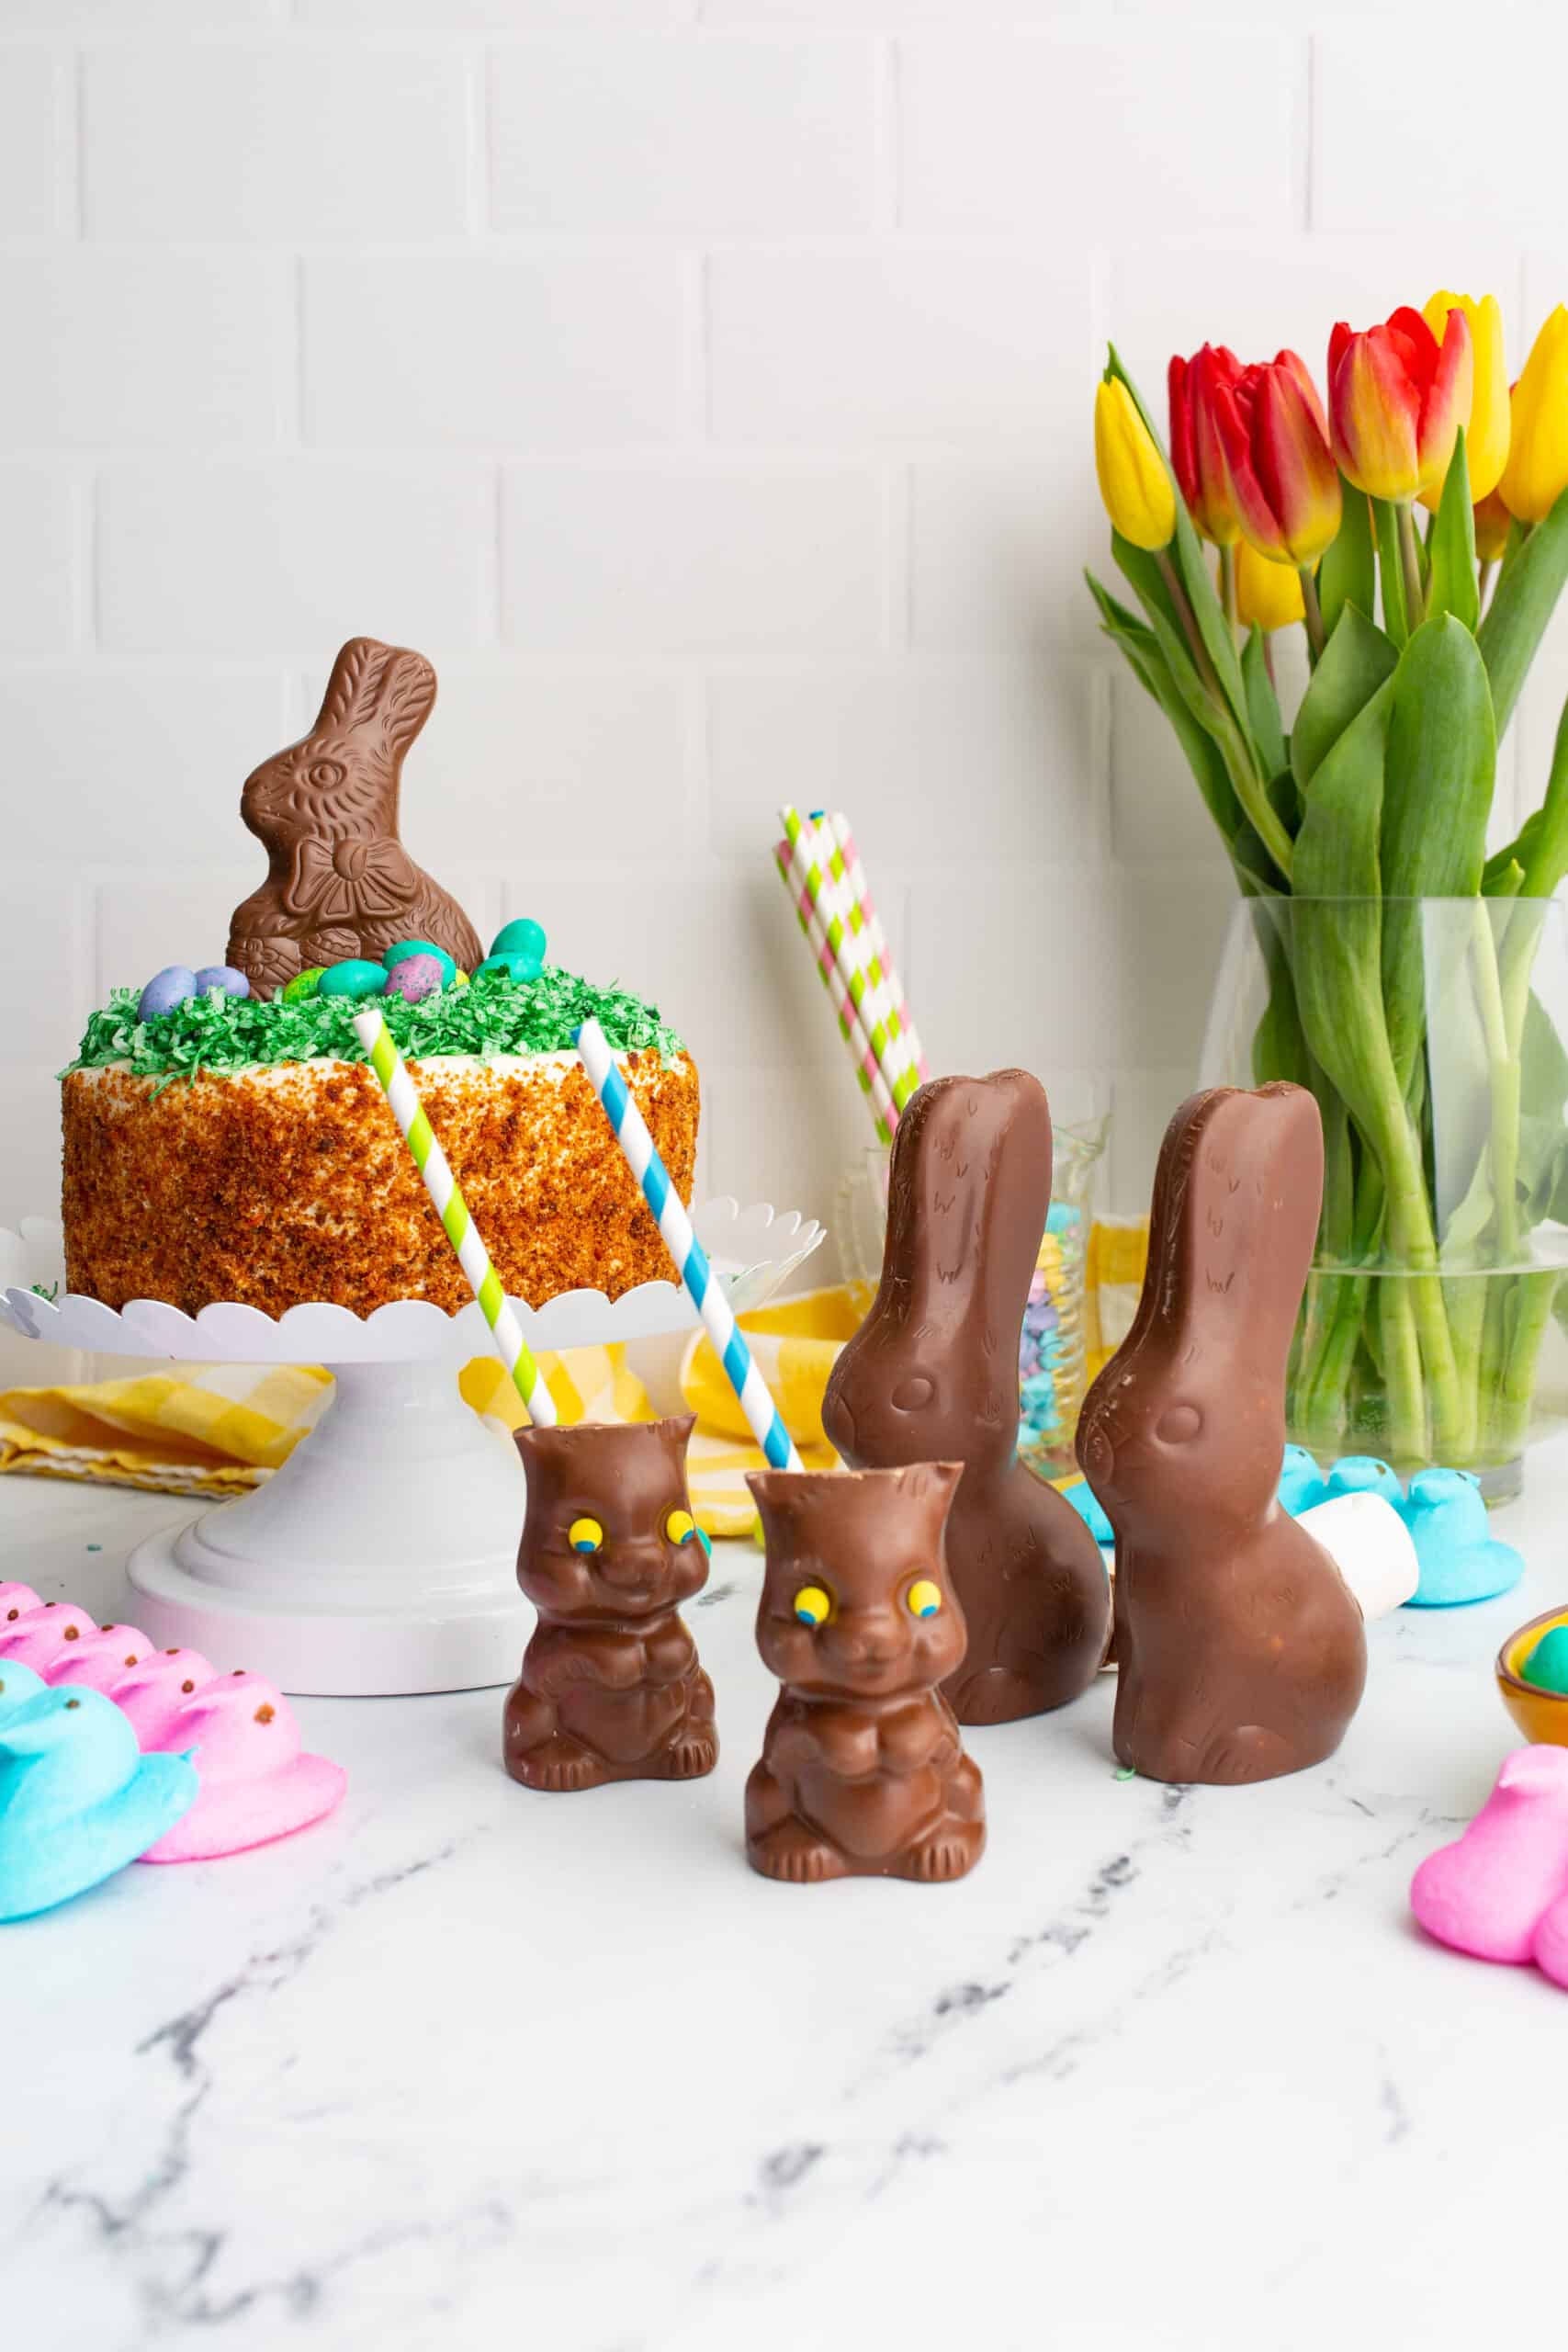 What to do with leftover chocolate easter bunnies: 3 Ways to Use Chocolate Easter Bunnies